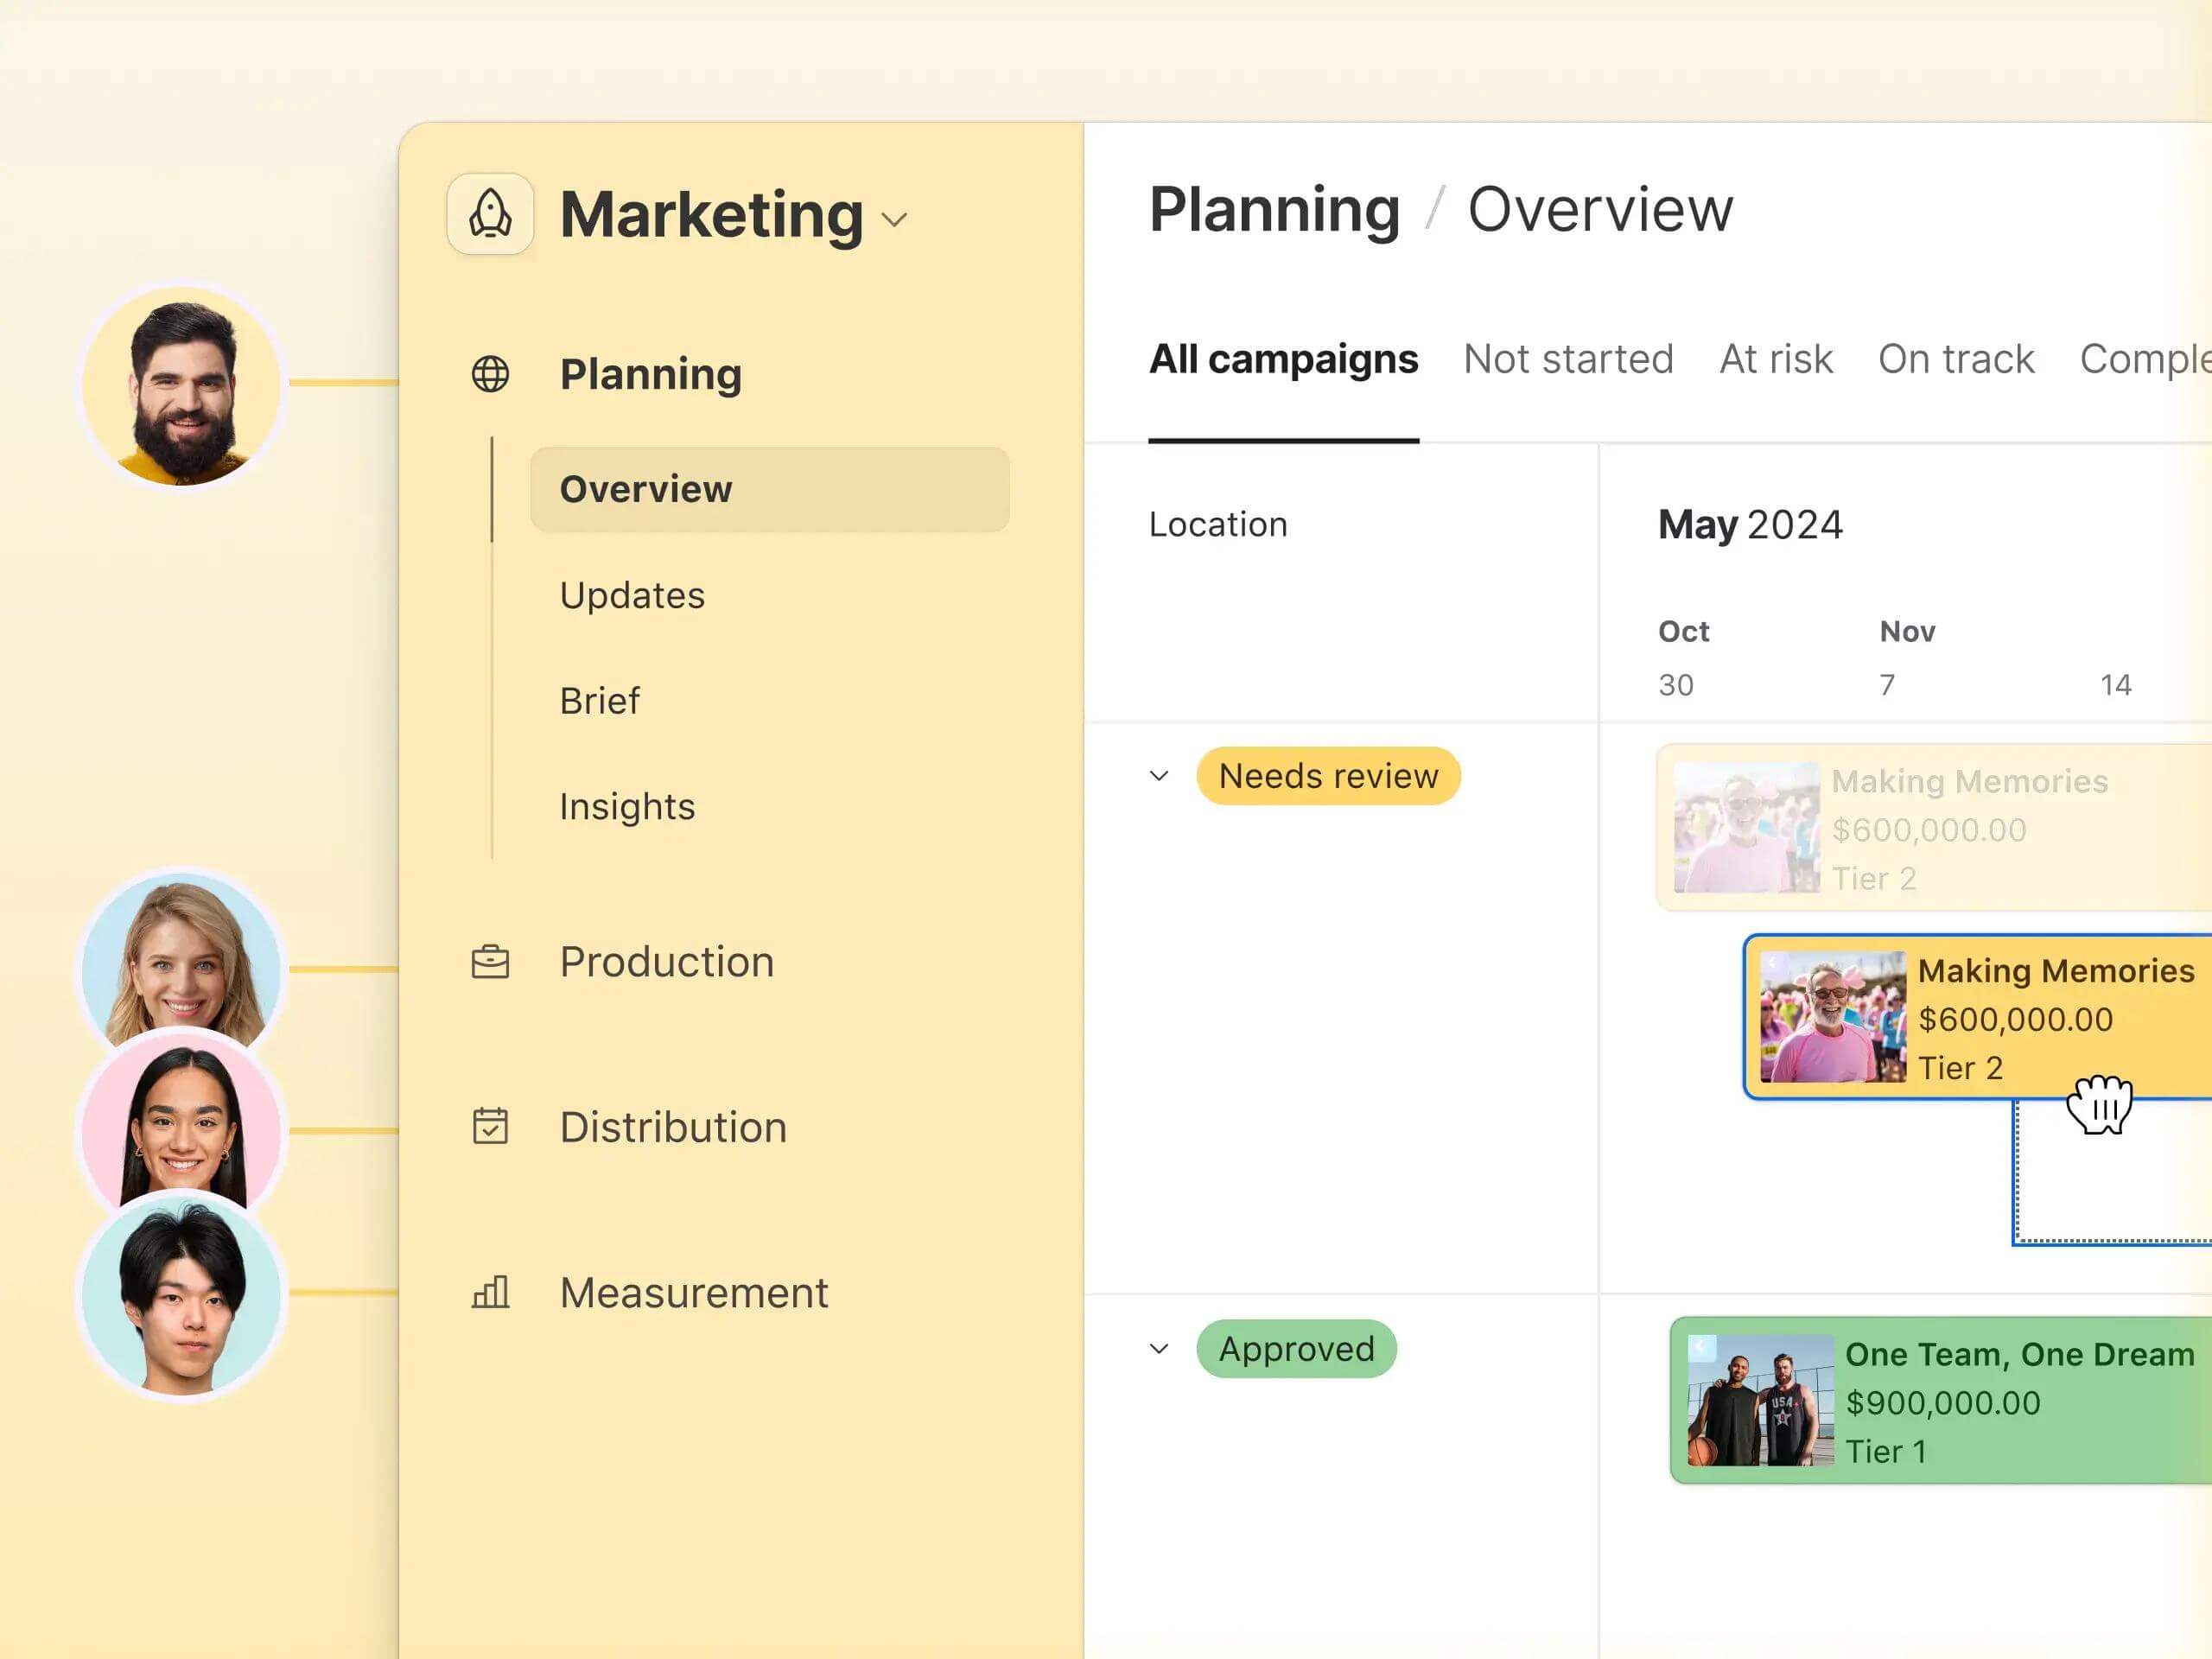 Marketing campaign management interface with team profiles and status overview of projects.